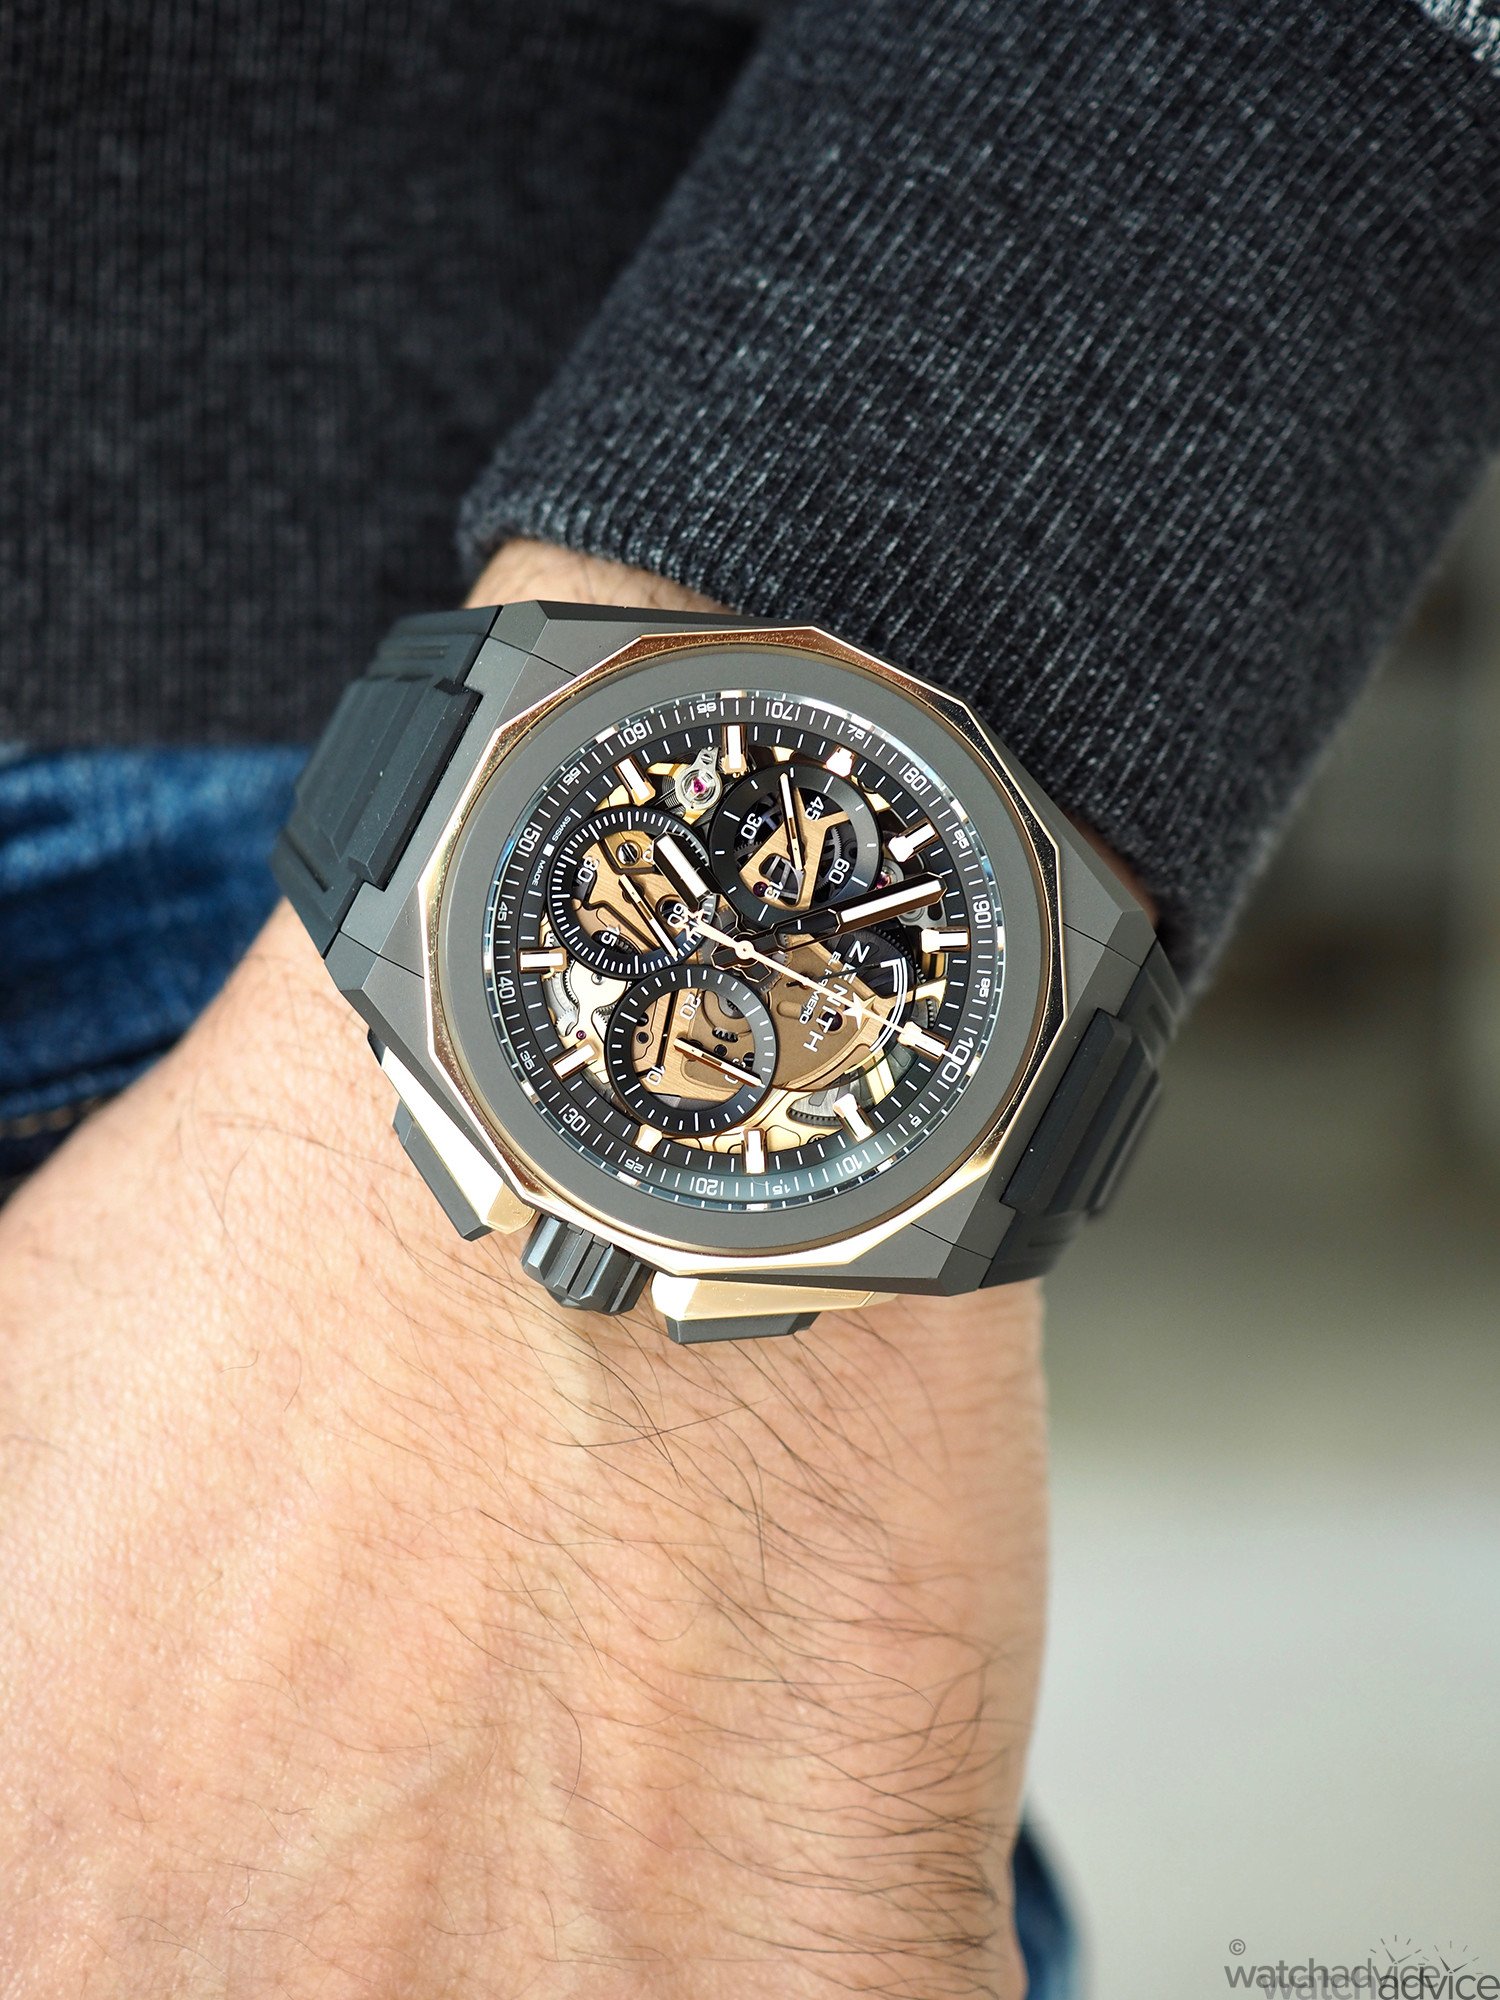 Zenith Defy Extreme Hands-on Review – Watch Advice